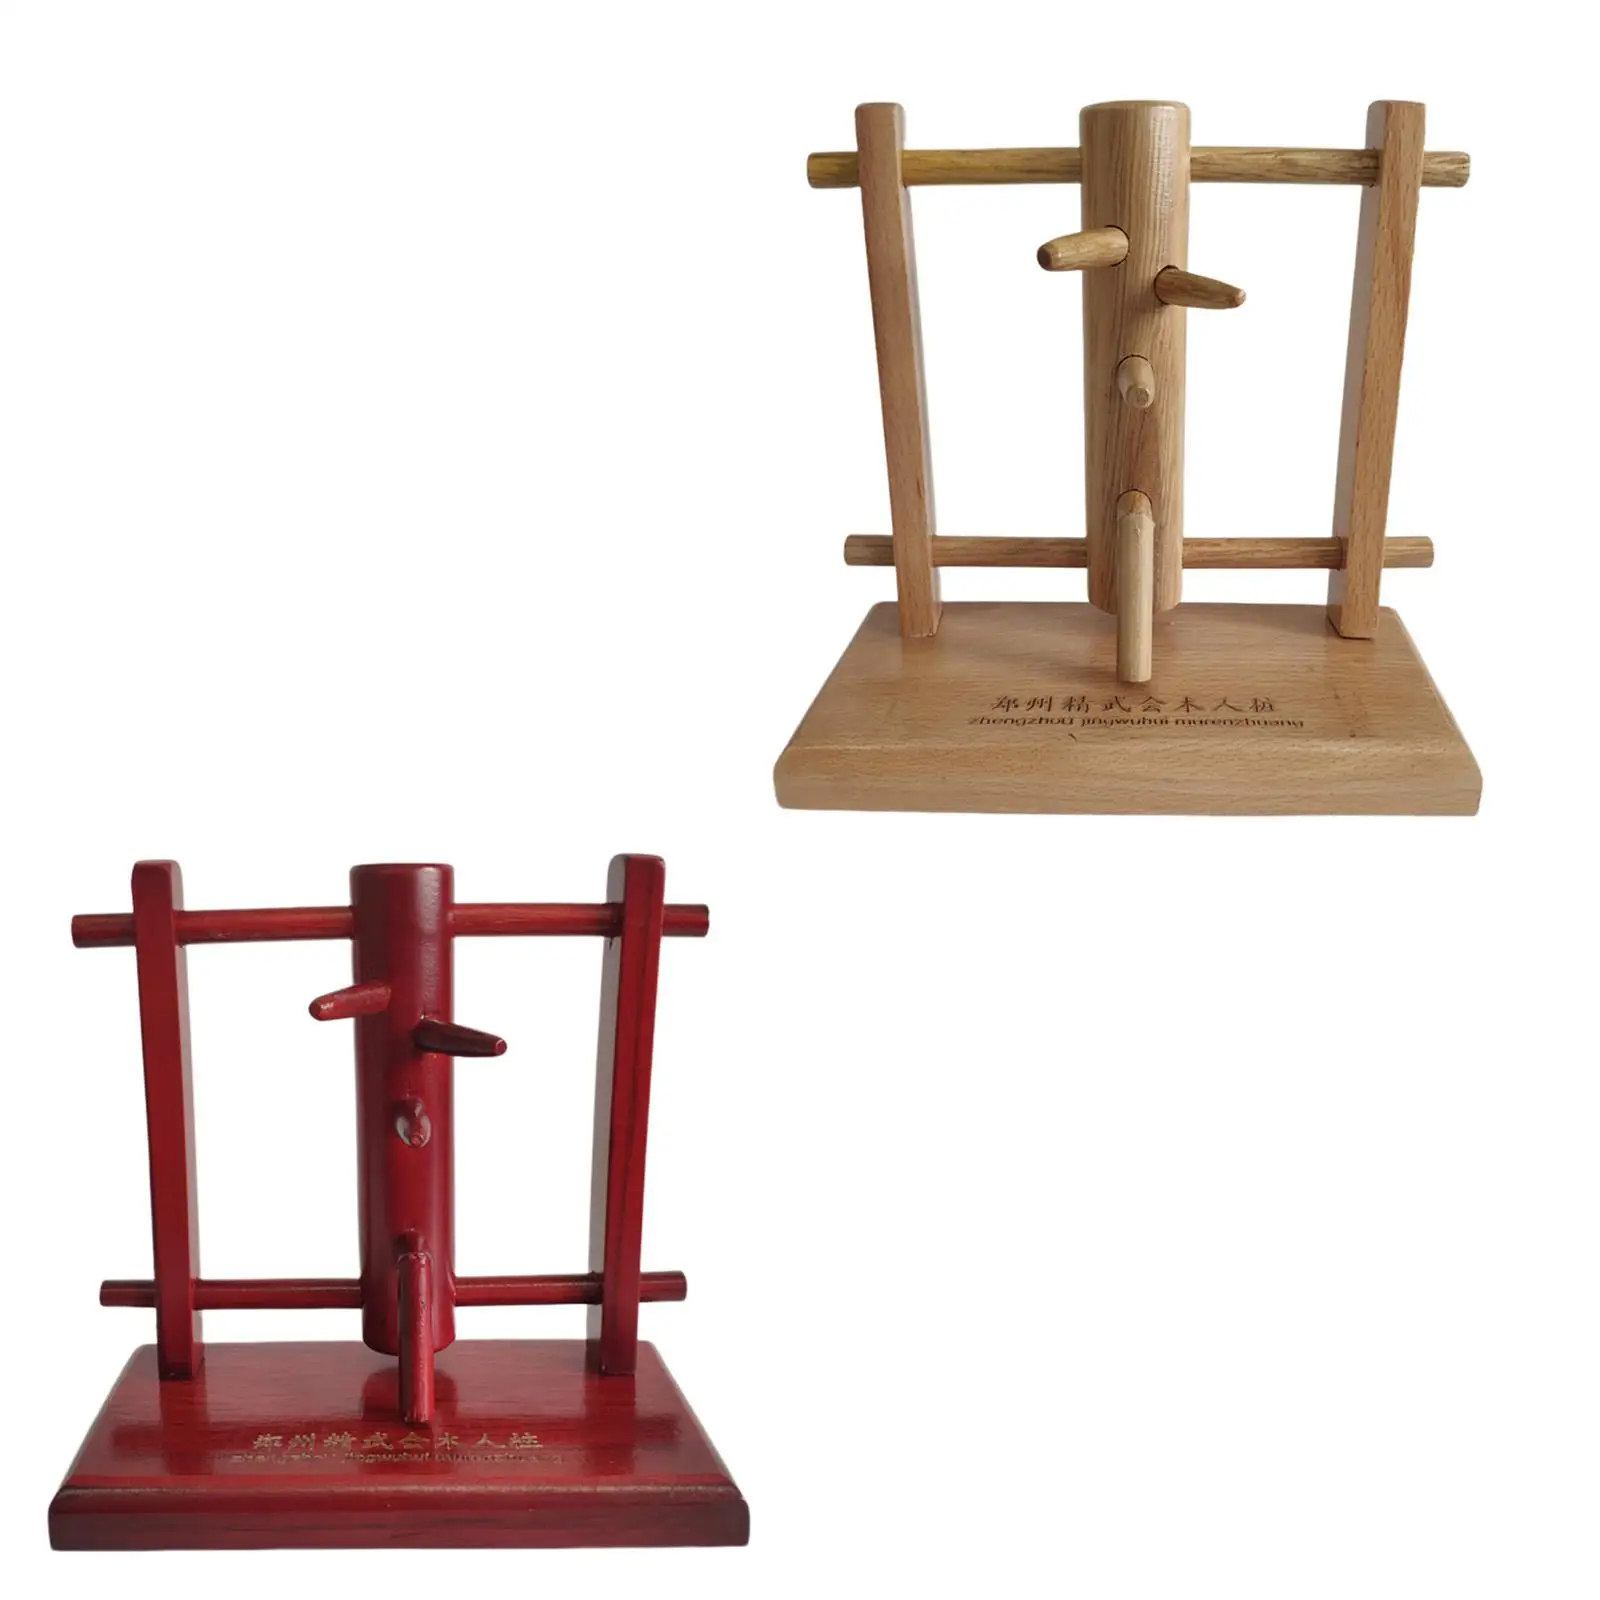 Wooden  Model Decor Display Figurine Wing Chun Hanging Collection Statue for Martial Arts School Living Room Shelves Car